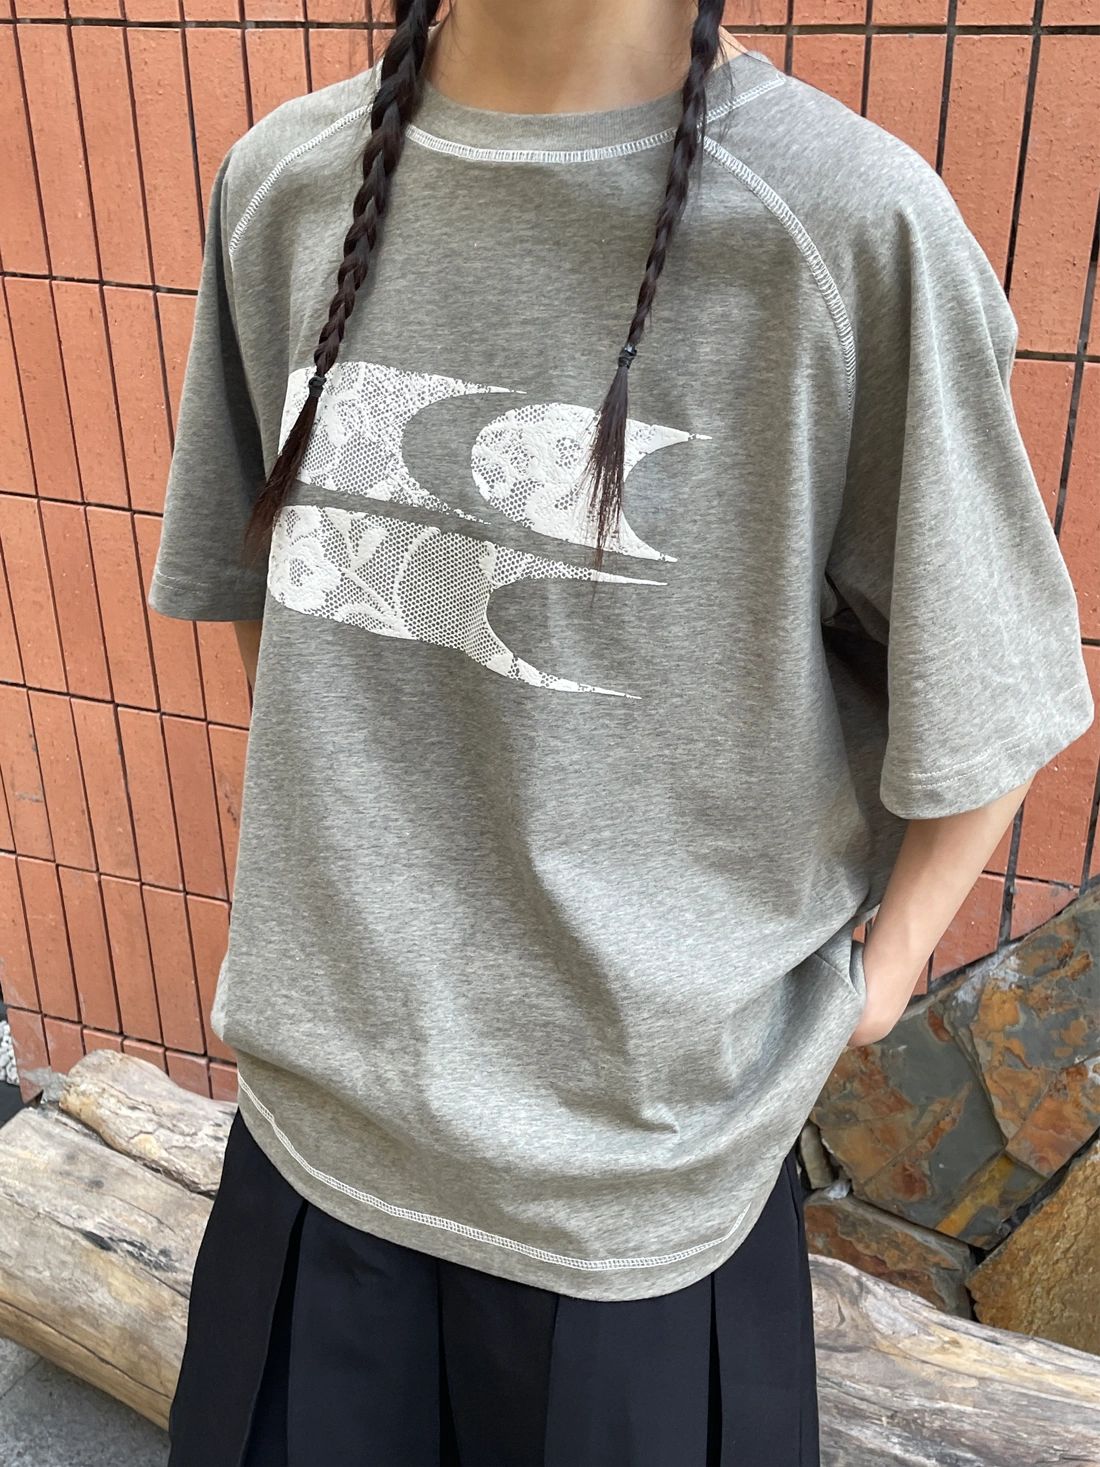 Lace Overlay Logo T-Shirt Korean Street Fashion T-Shirt By Crying Center Shop Online at OH Vault